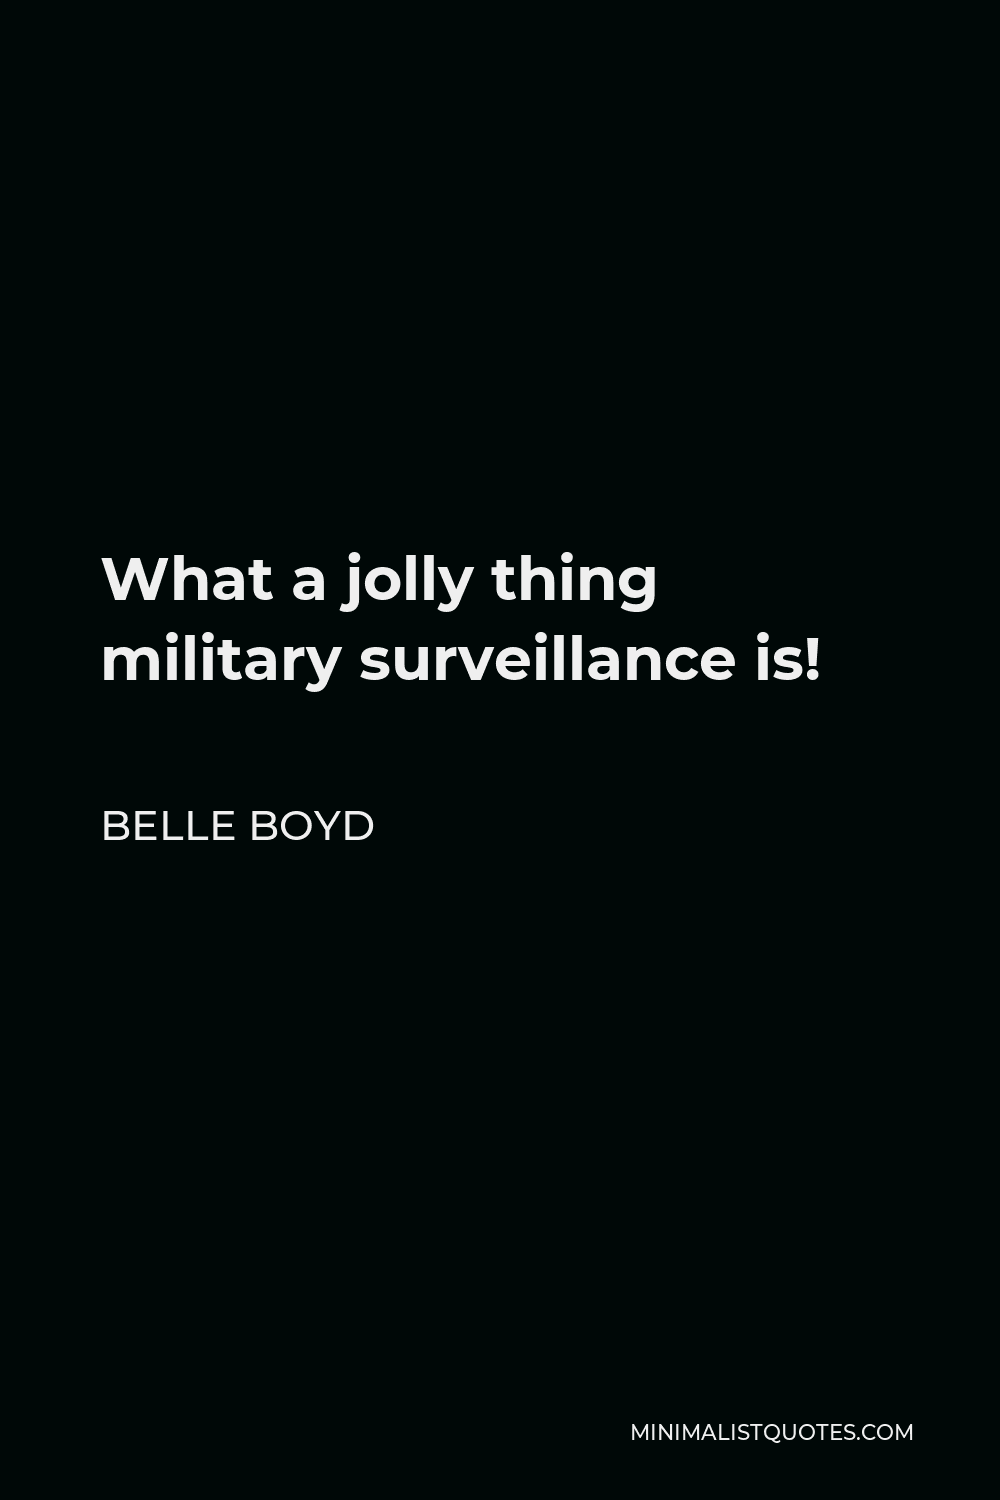 Belle Boyd Quote - What a jolly thing military surveillance is!